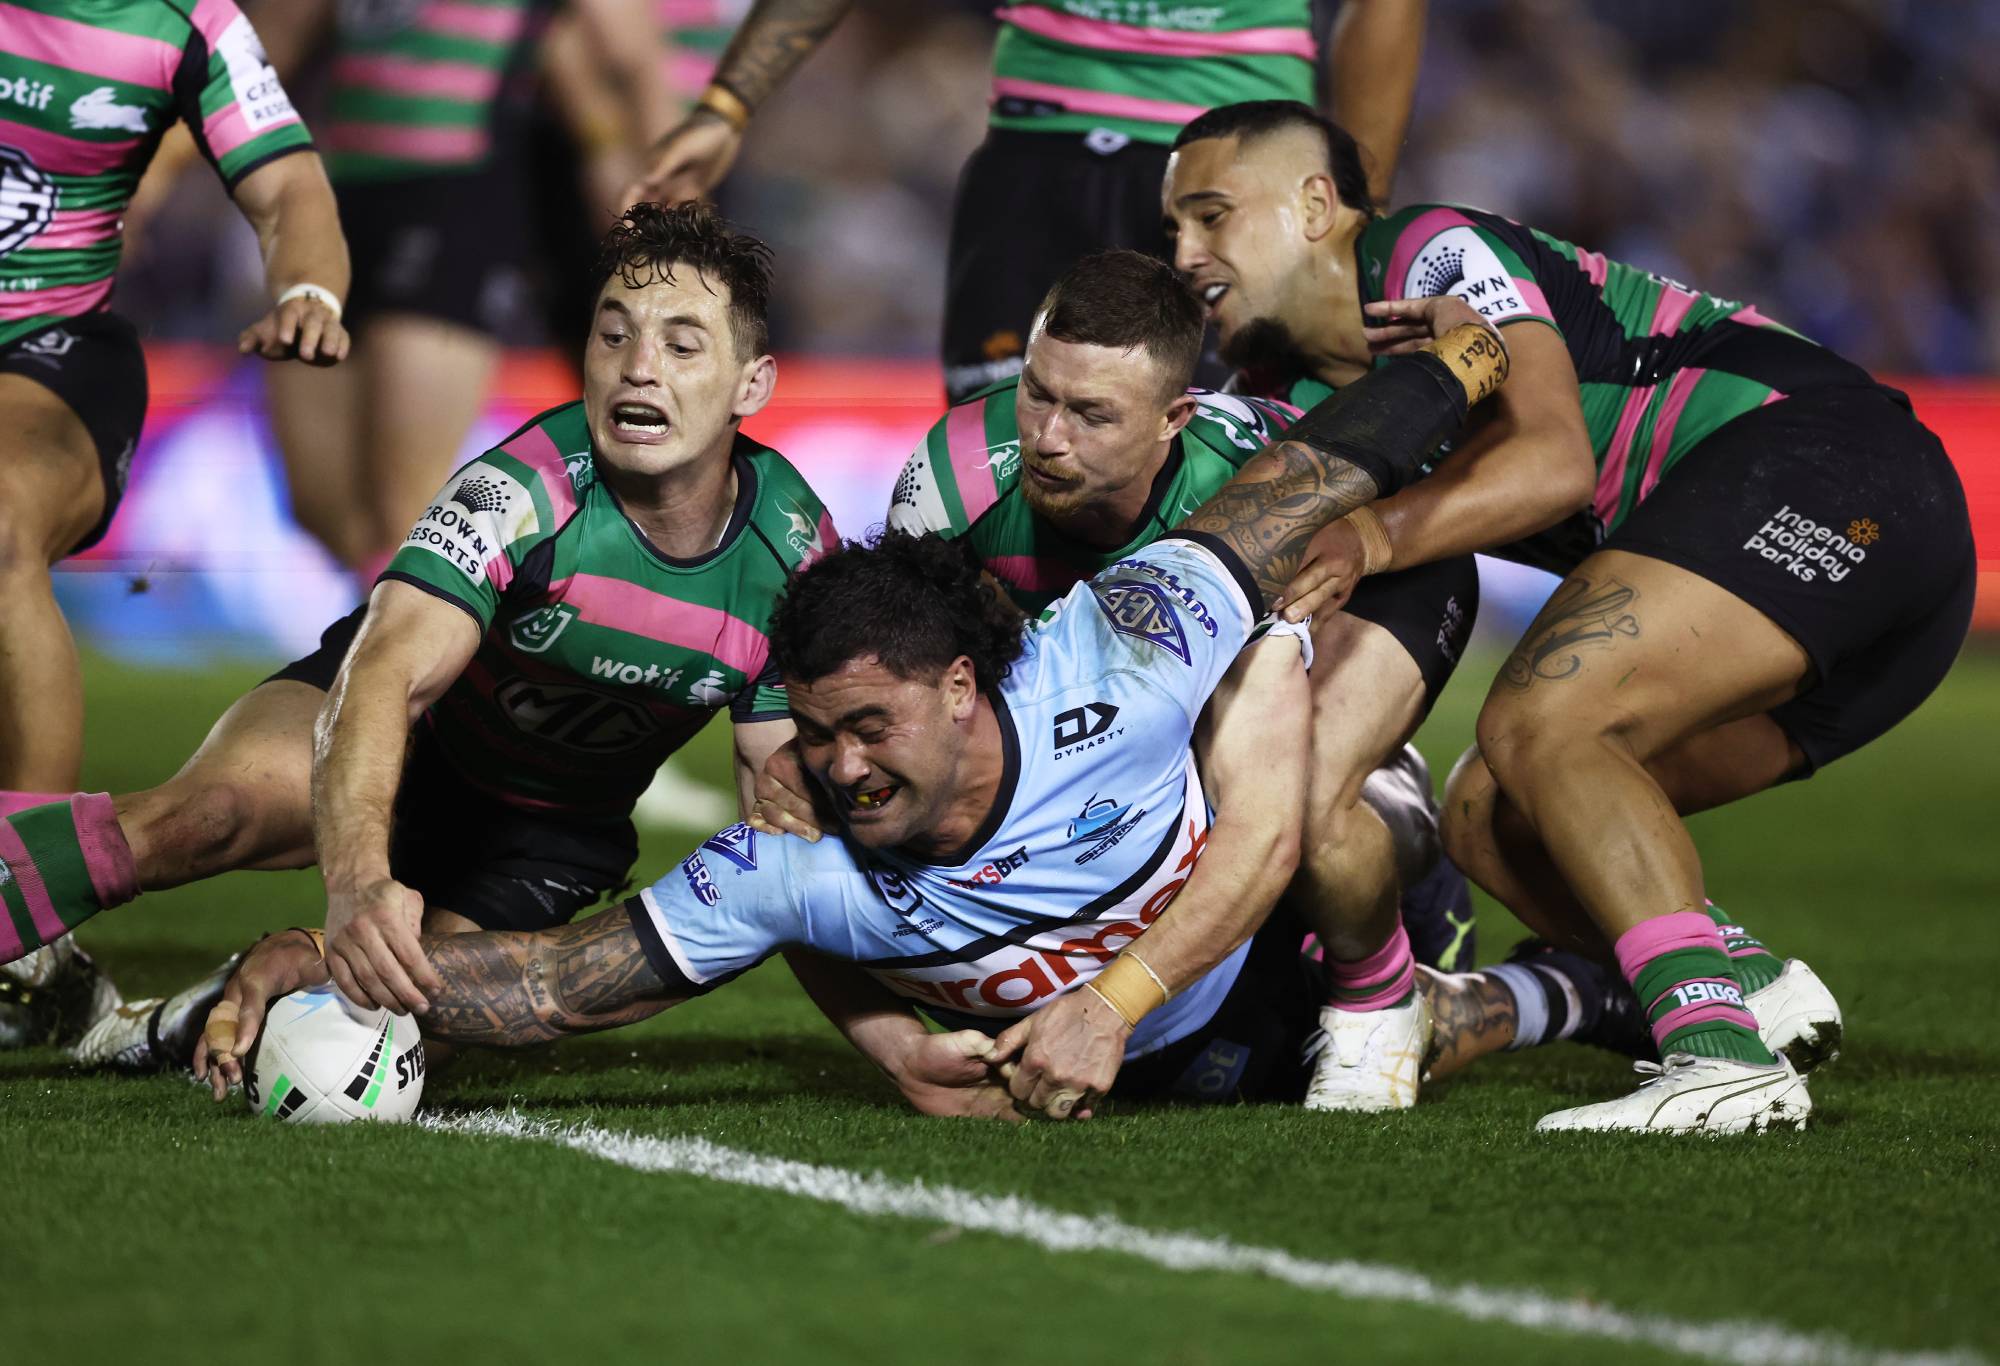 Raiders overcome Sticky date with fate? Black horse roosters? Storm in the conflicts?